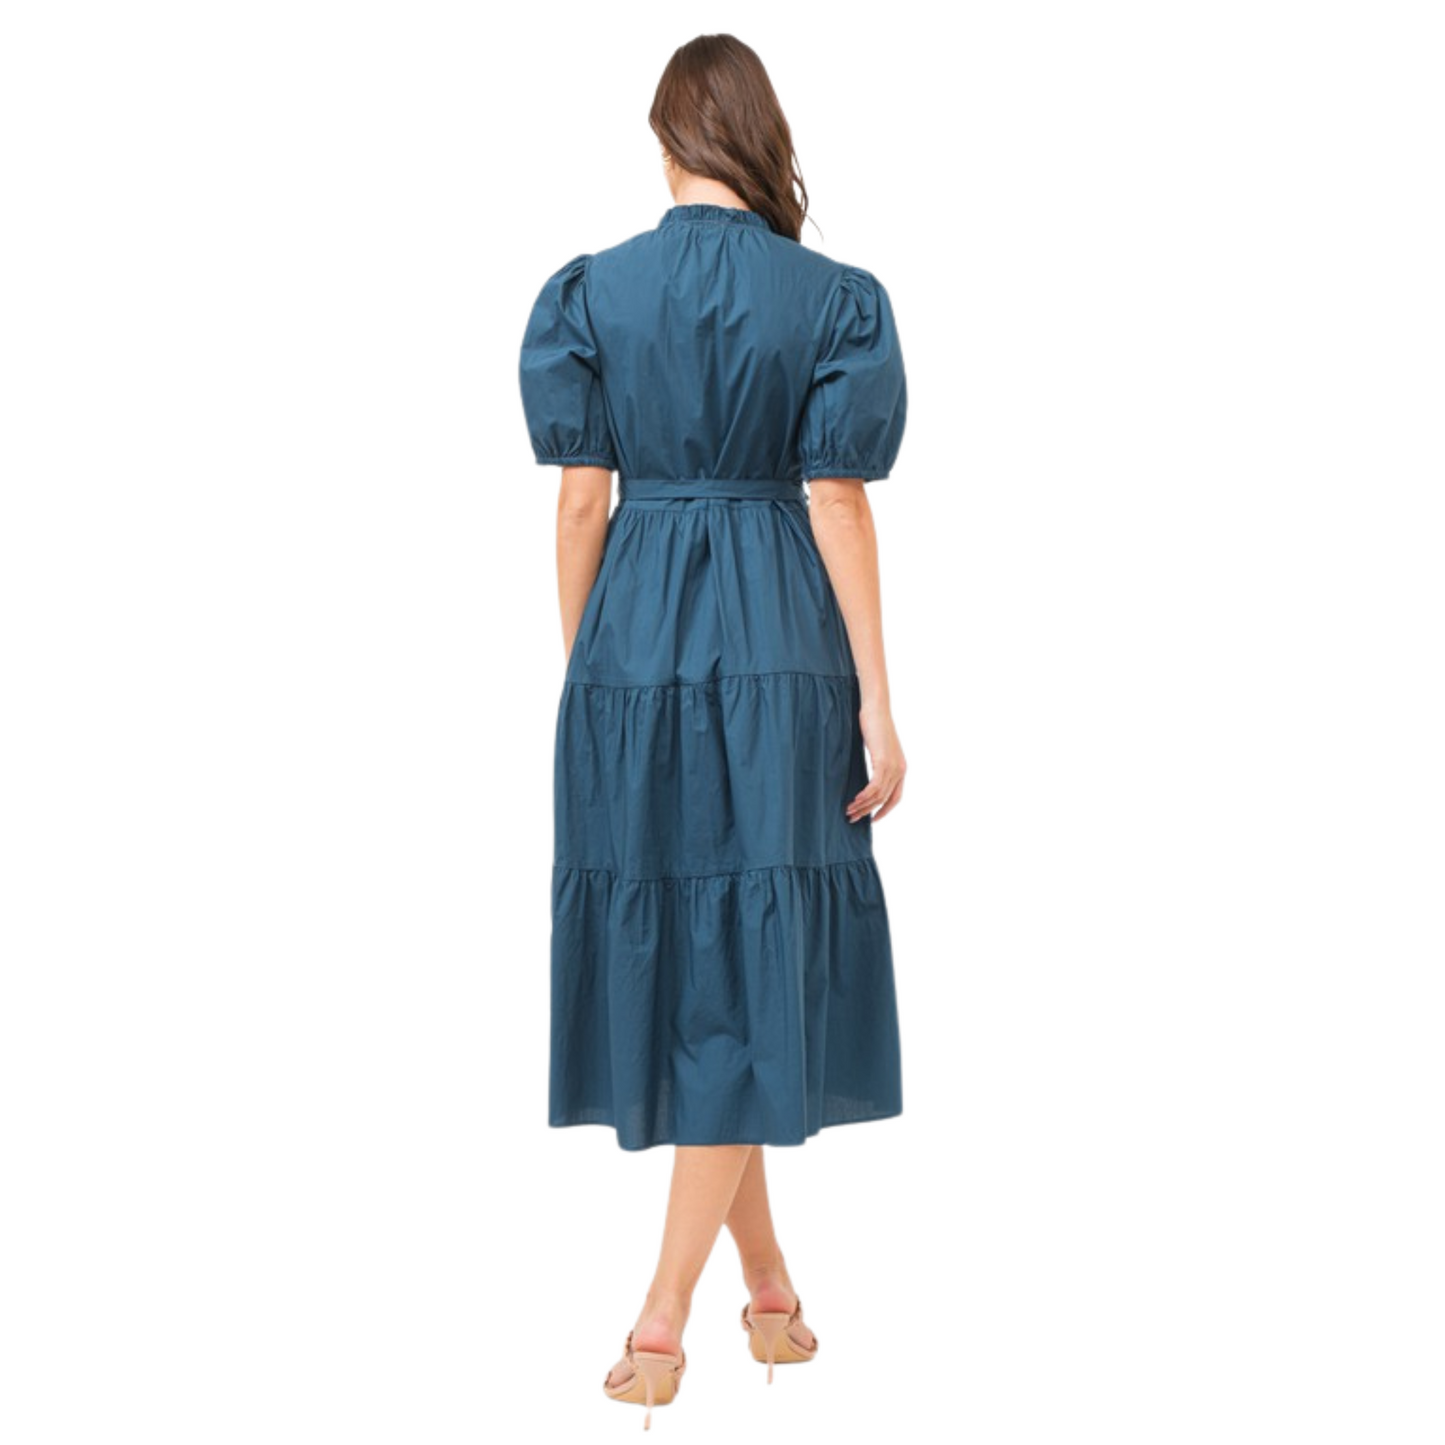 Expertly crafted from sleek navy fabric, this Tiered Midi Dress is the epitome of understated elegance. With its midi length and v-neck design, it flatters every figure. The belted waist cinches to accentuate your curves, while the short sleeves provide versatile styling options. Perfect for any occasion, this dress is a must-have for every wardrobe.